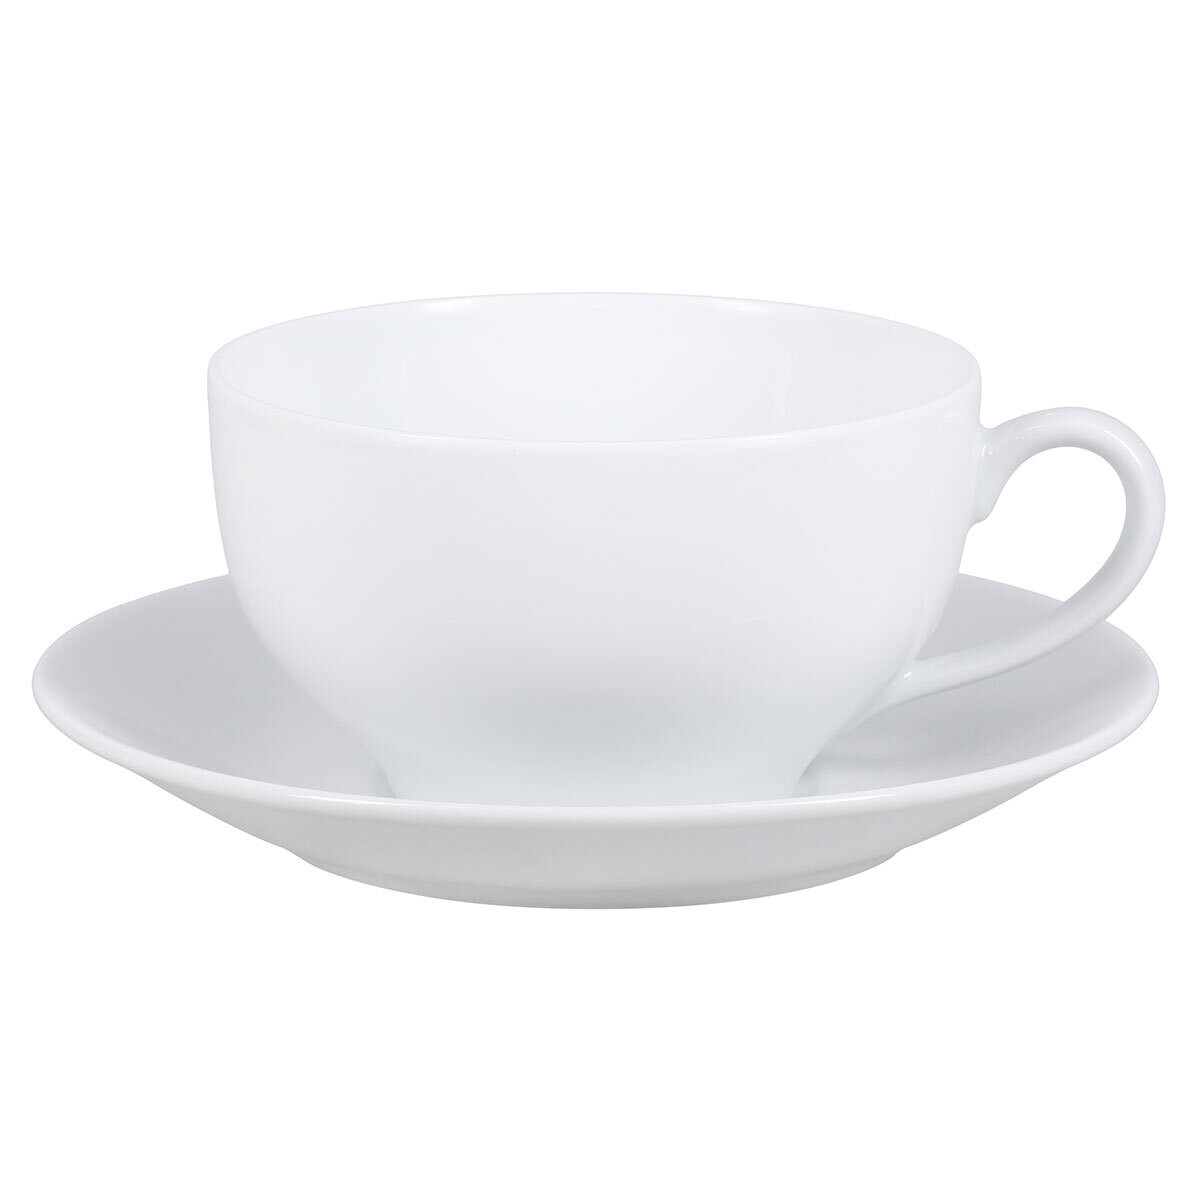 Royal Limoges Coupe White Breakfast Saucer T300-VIE00001